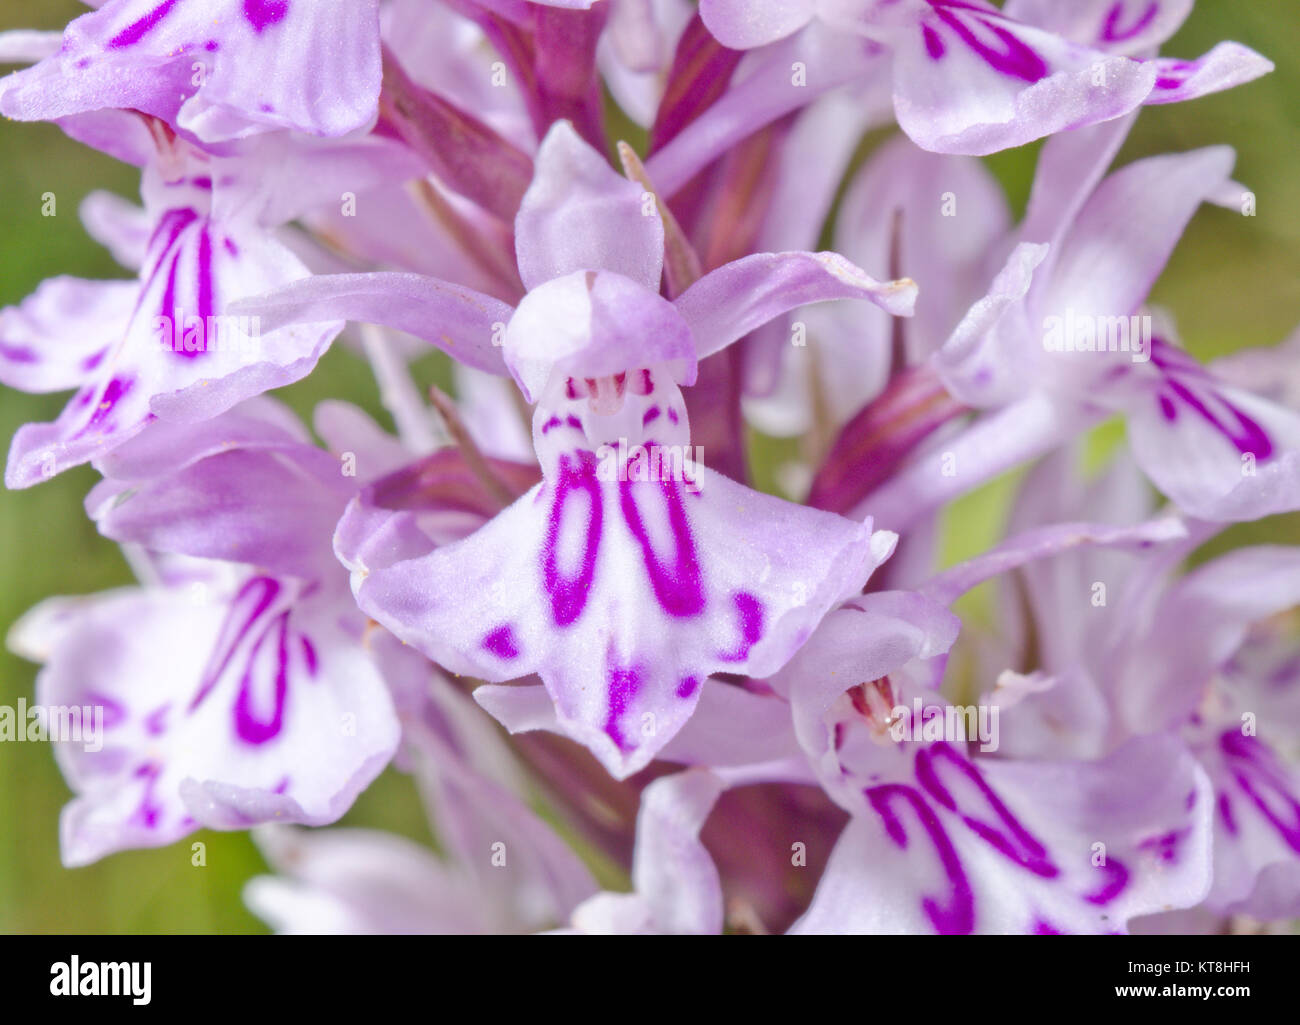 Letters, Initials & Monograms on Wild Flowers - Monogrammed Common Spotted Orchid (Dactylorhiza fuchsii) 'OO' pattern Totally natural! Sussex, UK Stock Photo